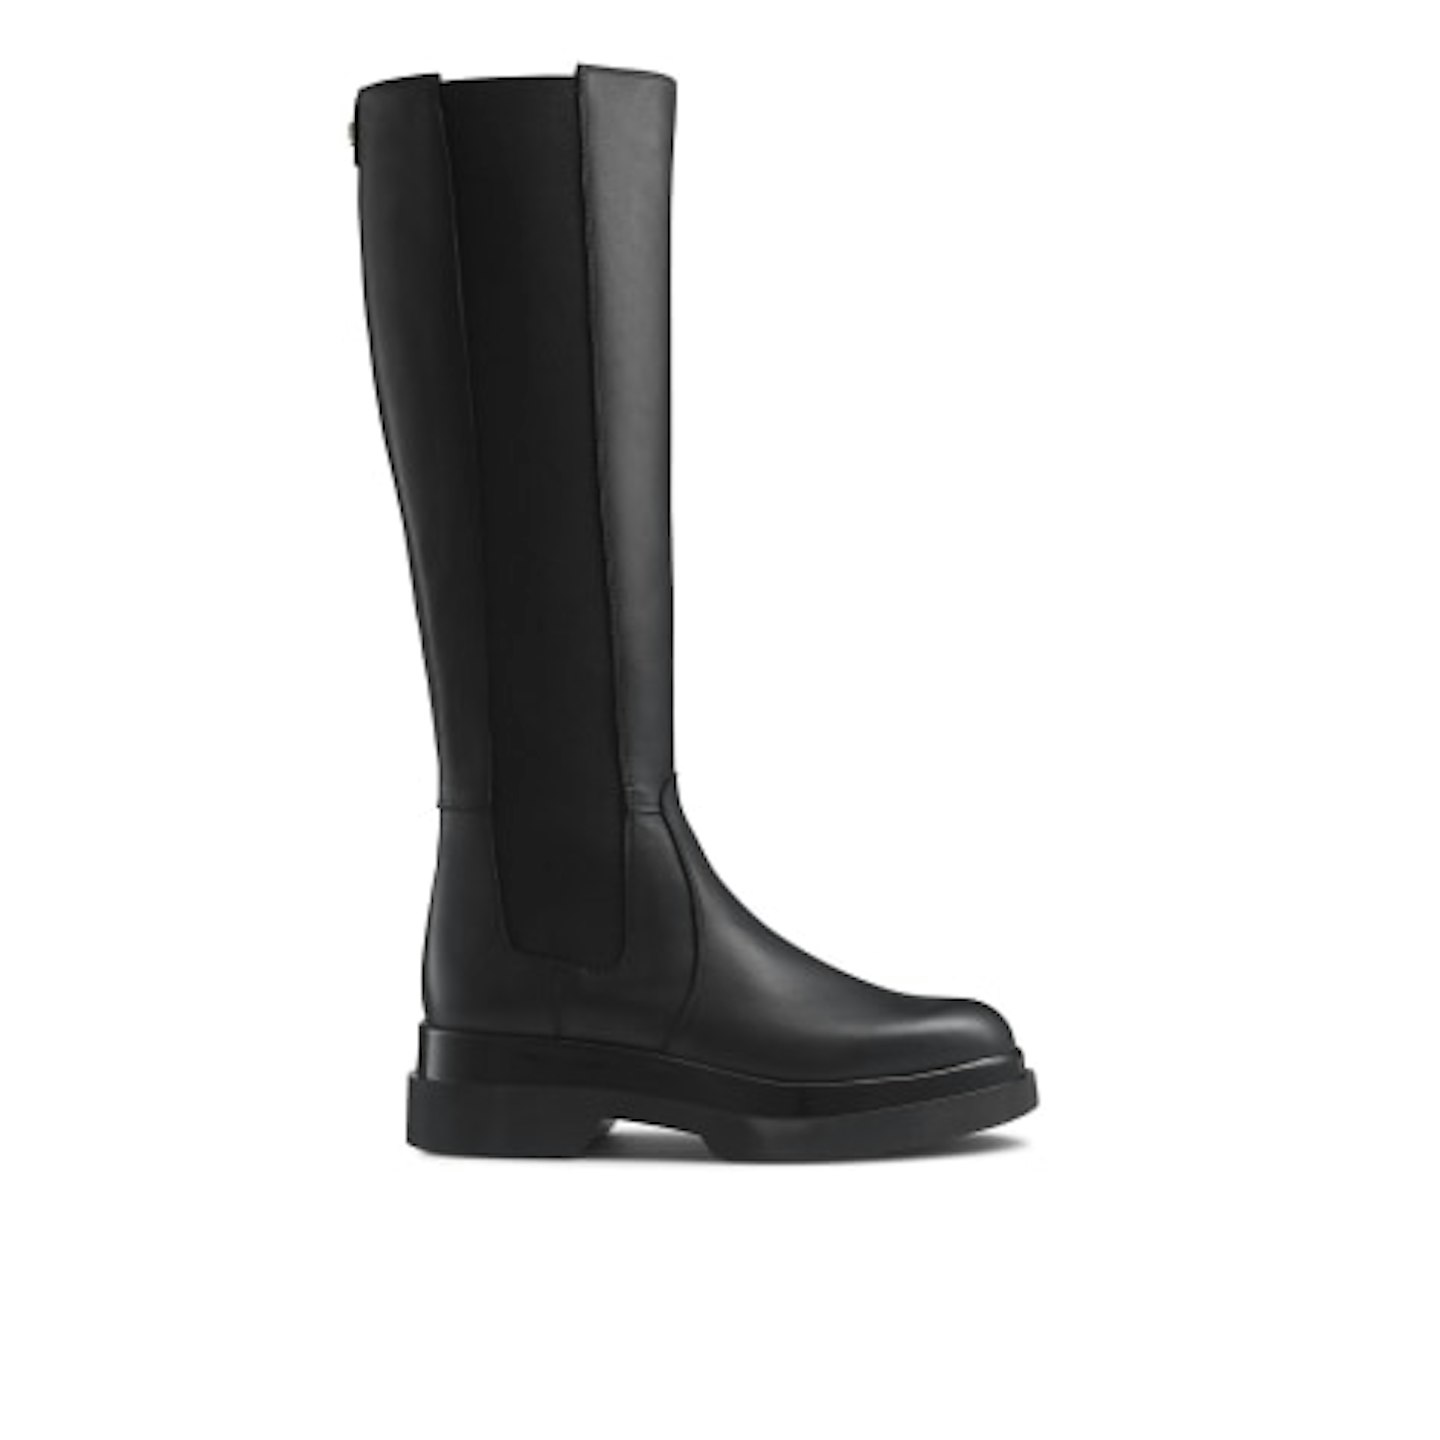 Russell & Bromley, Knee High Chelsea, £295